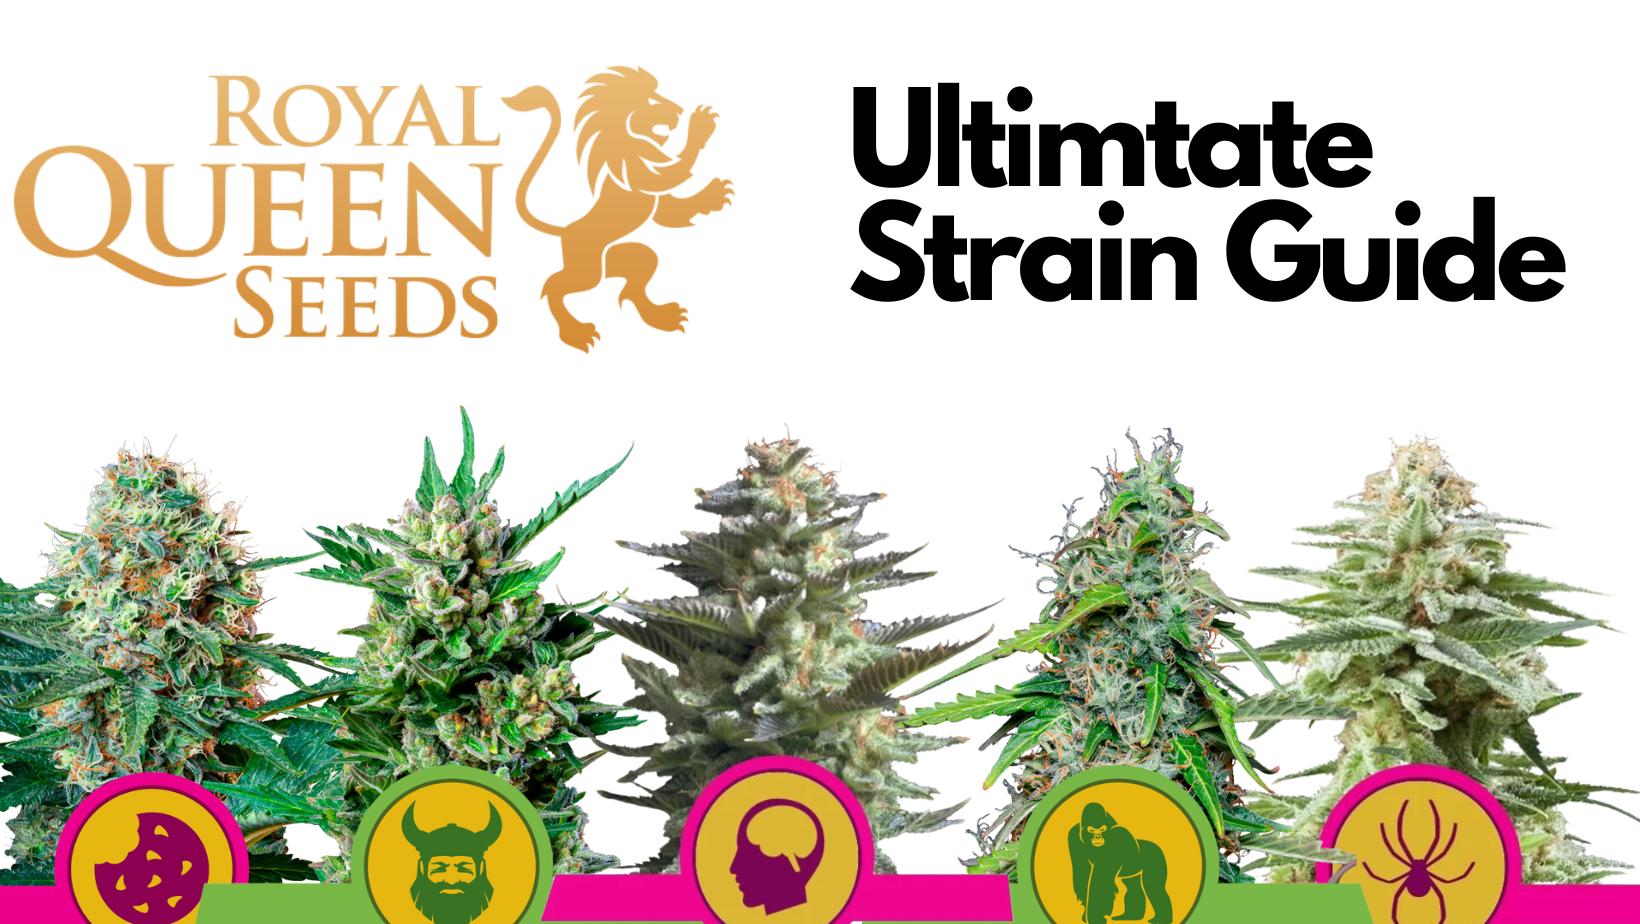 Ultimtate Strain Guide royal queen seeds banner